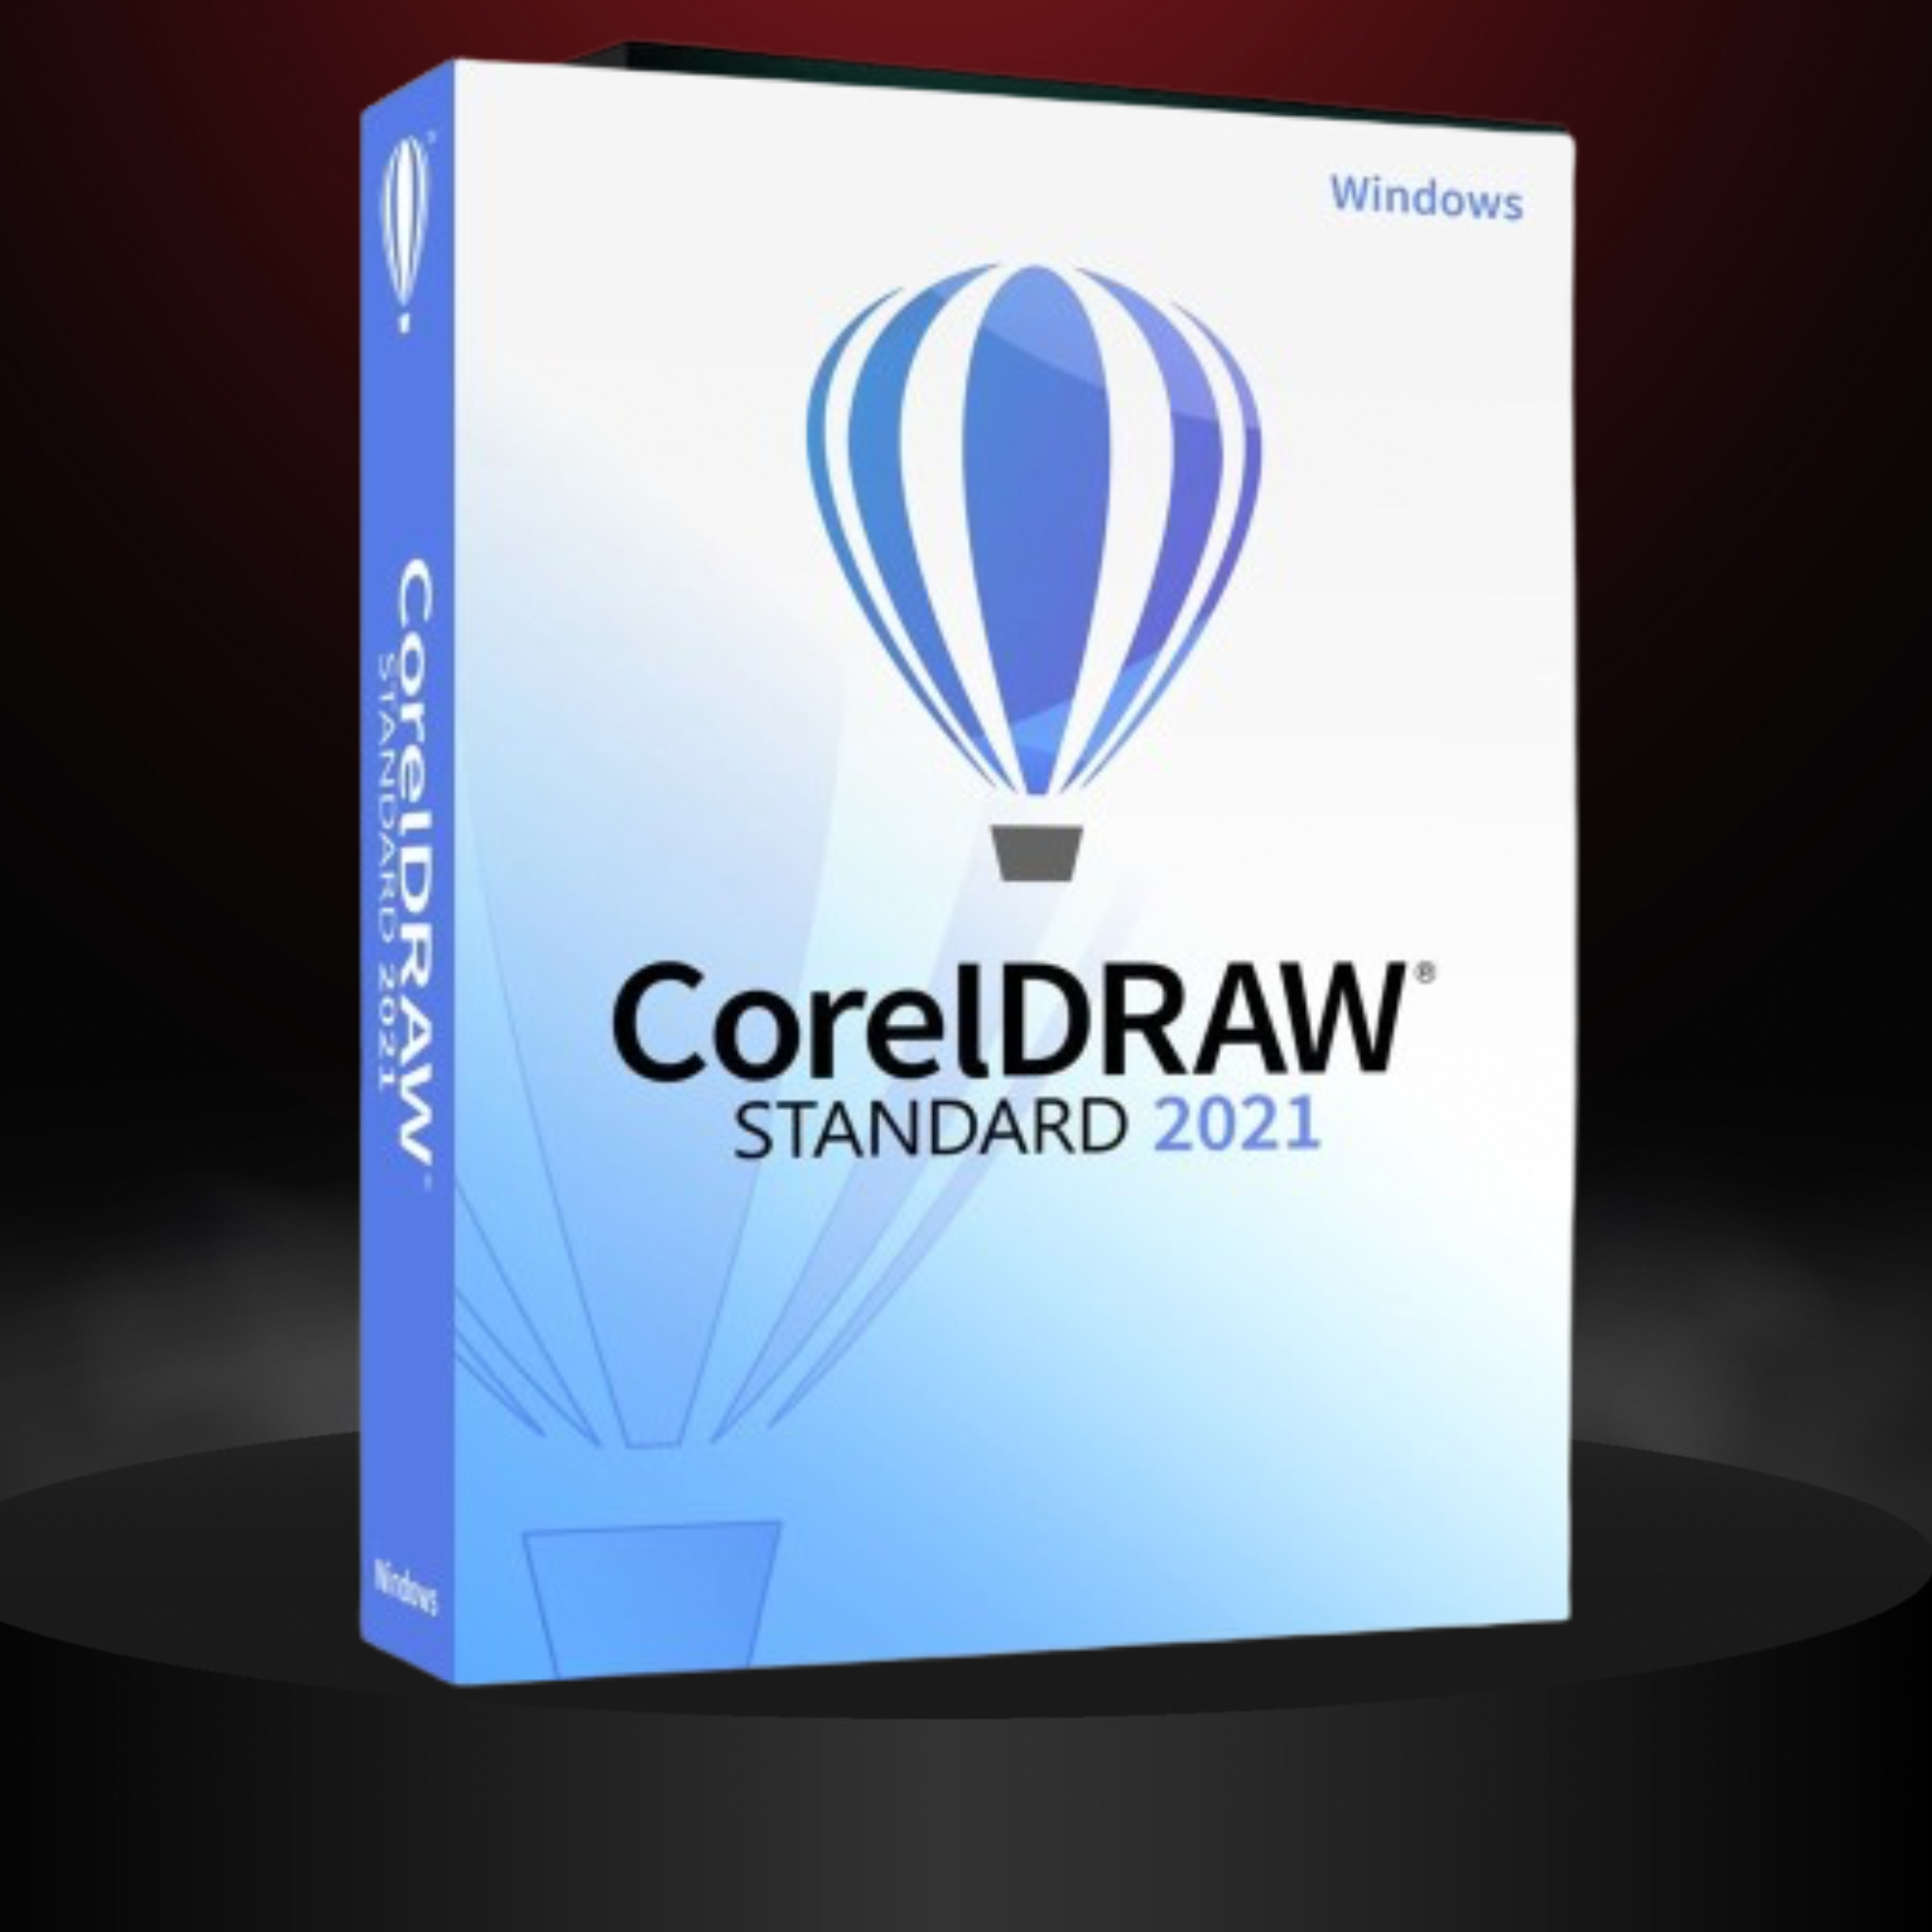 CORELDRAW STANDARD 2021 OFFICIAL LICENSE / ONLY FOR WINDOWS / INSTANT DELIVERY / KEY LIFETIME 1 DEVICE